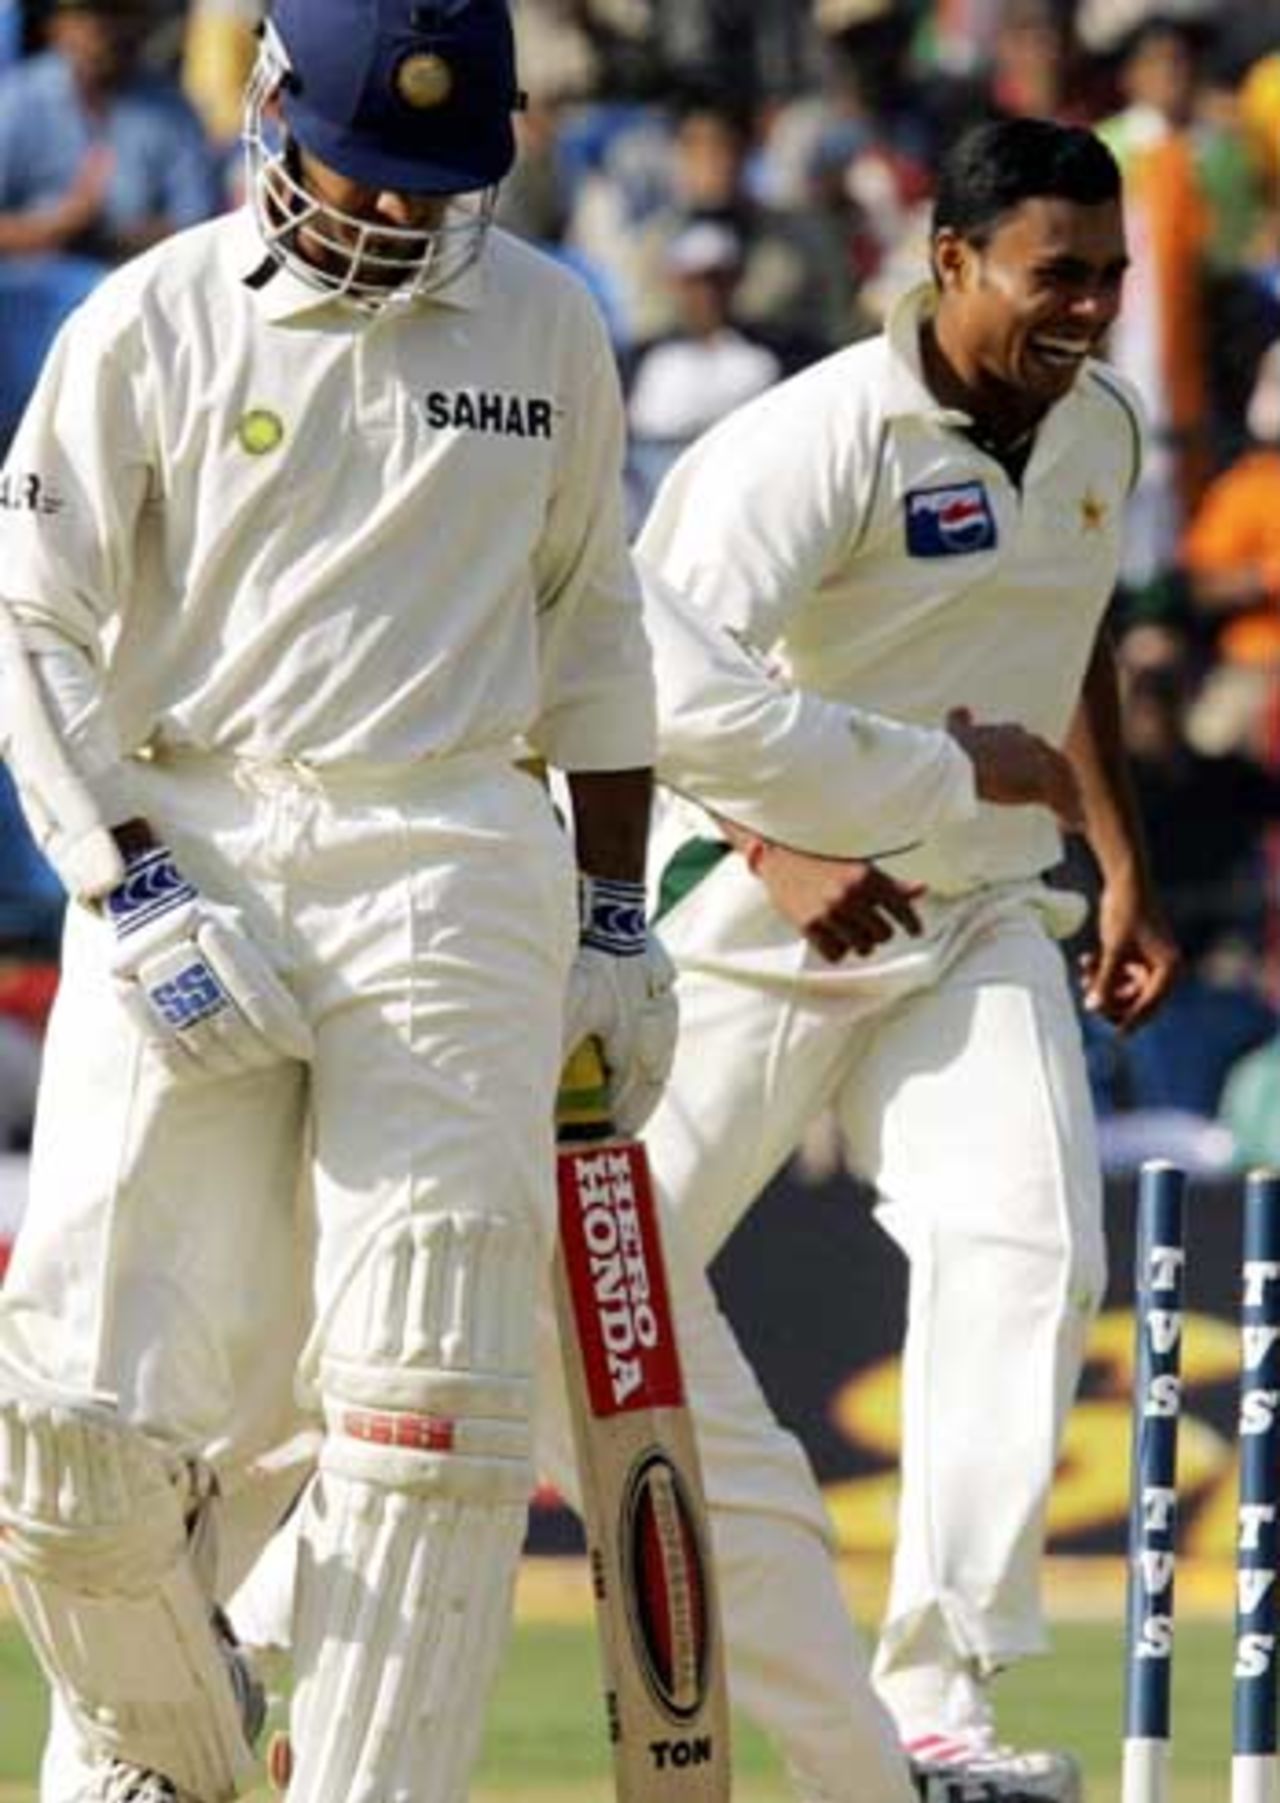 After Virender Sehwag was dismissed Pakistan piled on the pressure with Danish Kaneria flummoxing Sourav Ganguly, India v Pakistan, 3rd Test, Bangalore, 3rd day, March 24, 2005